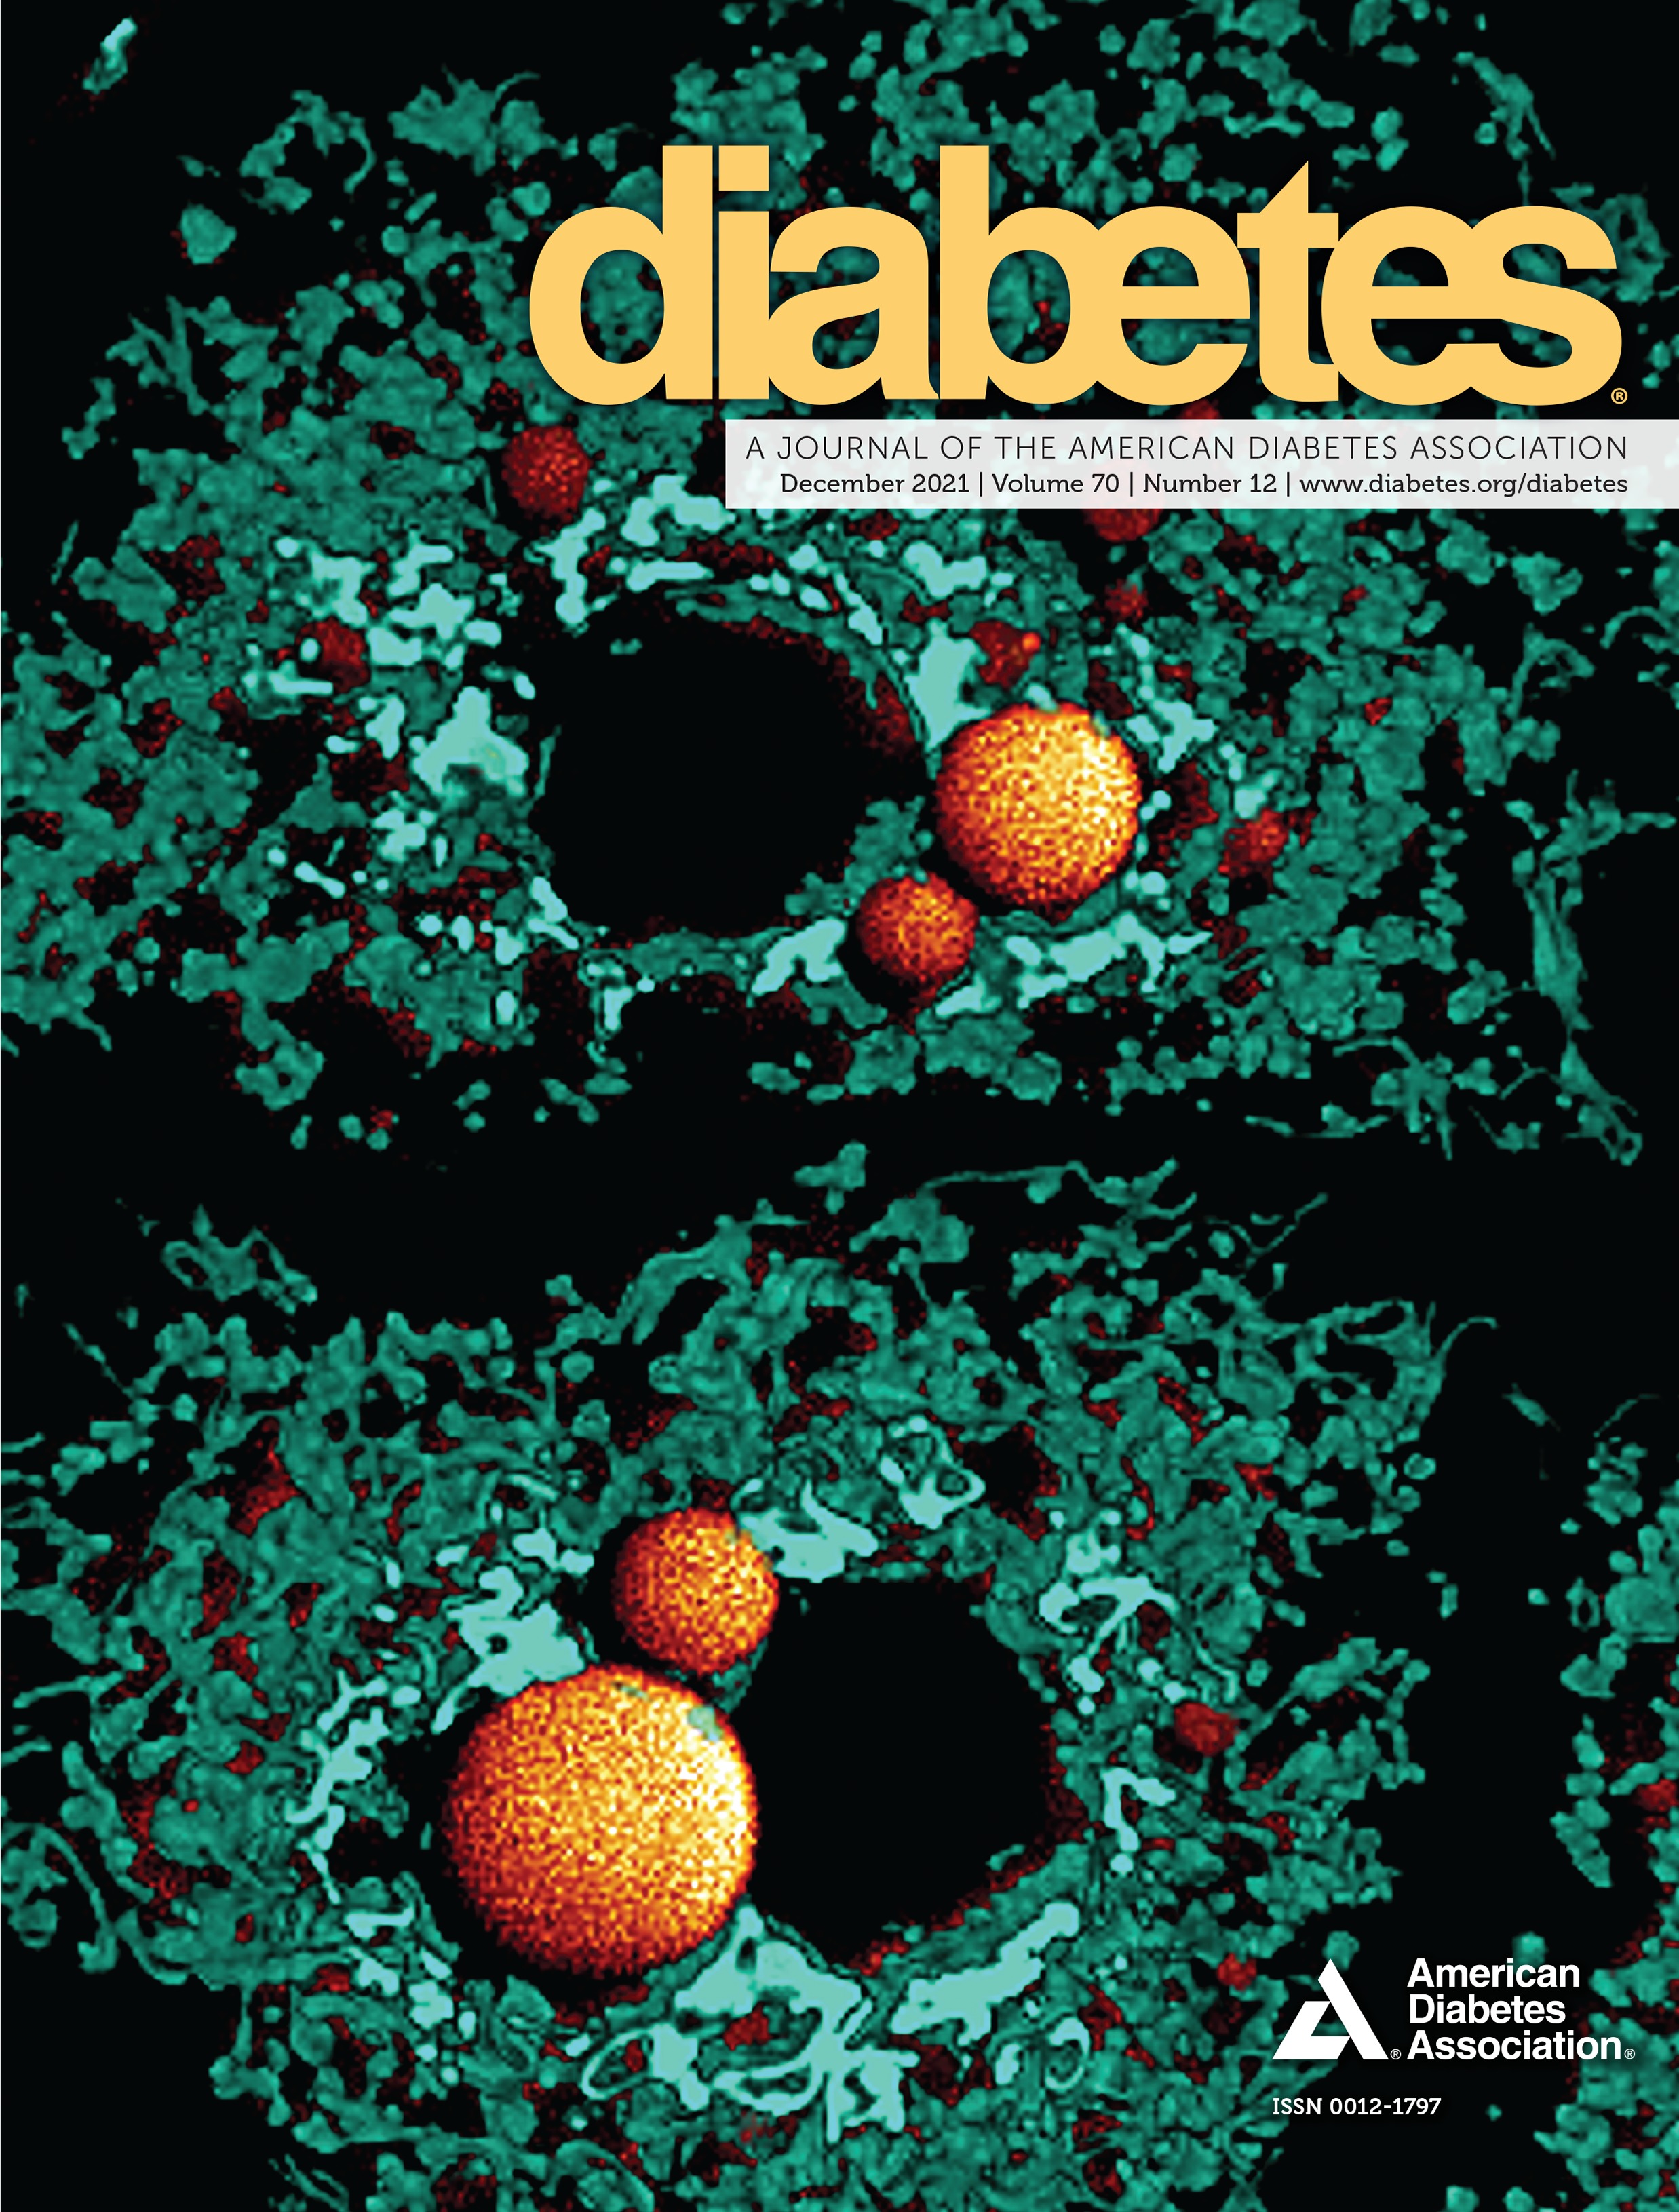 Empagliflozin Treatment Is Associated With Improvements in Cardiac Energetics and Function and Reductions in Myocardial Cellular Volume in Patients With Type 2 Diabetes